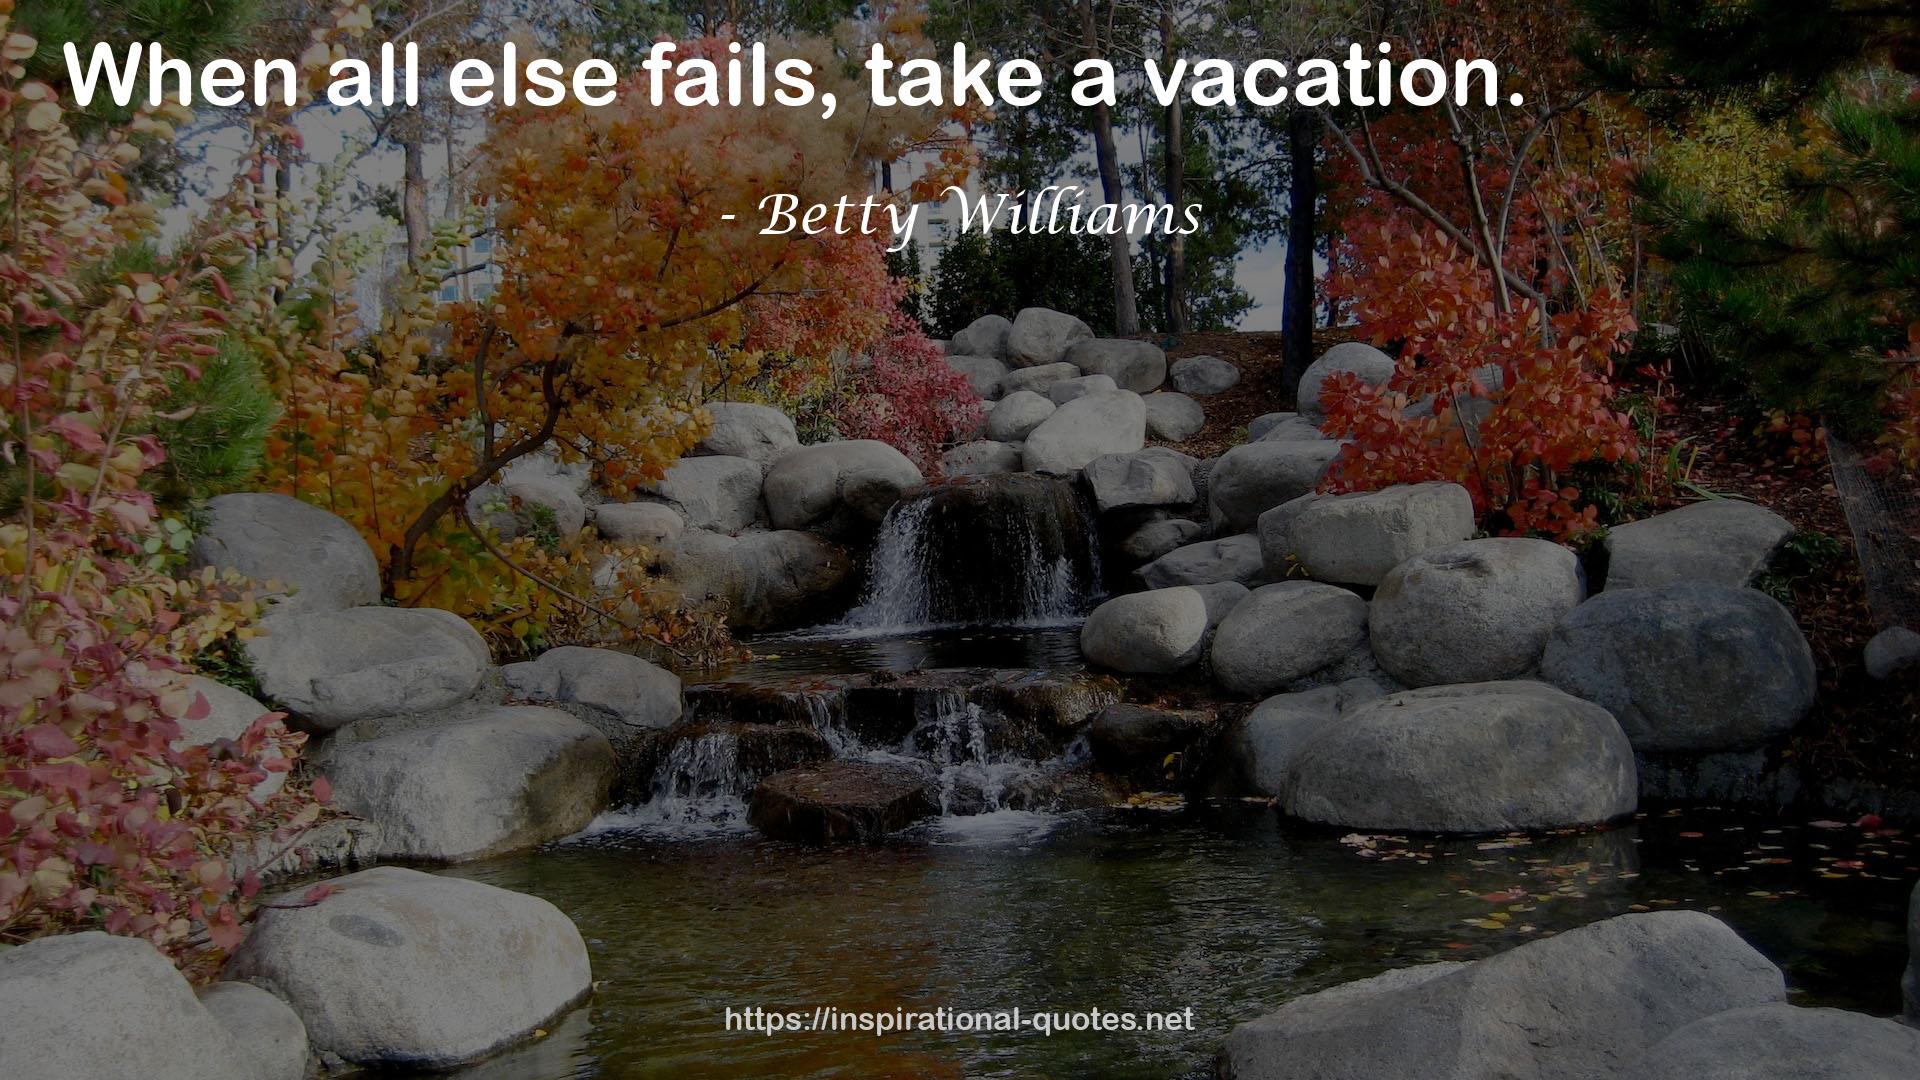 Betty Williams QUOTES